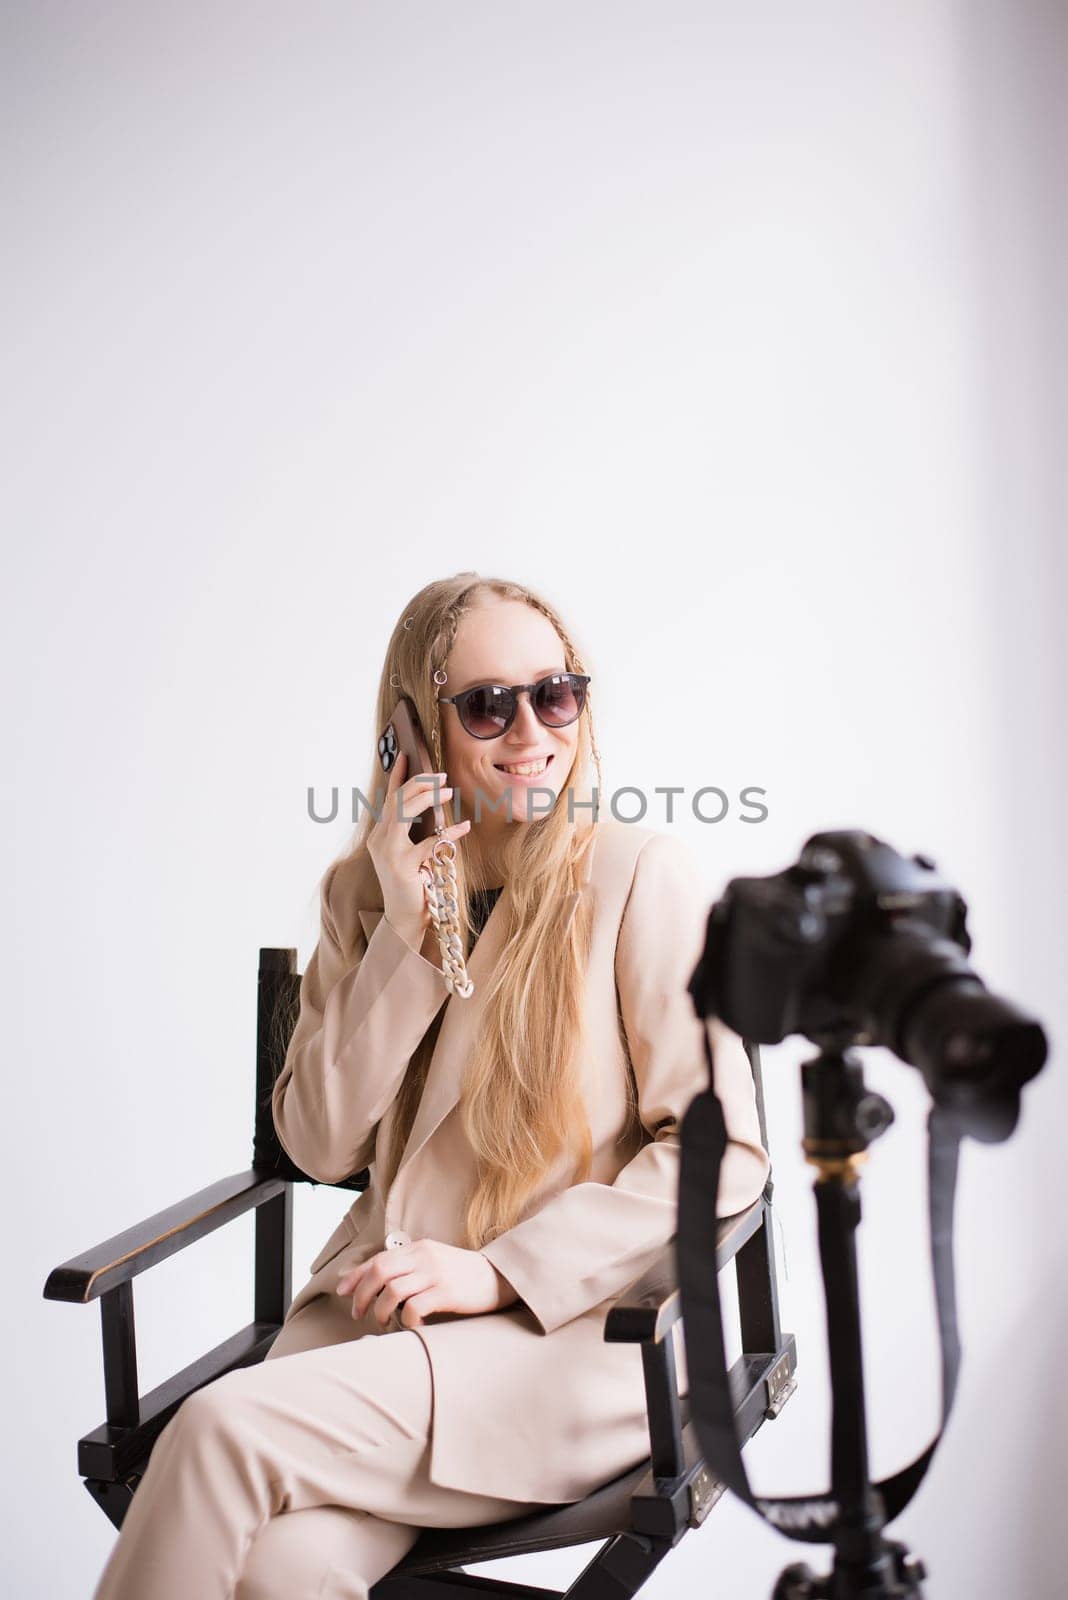 A woman videographer a talking on the phone by OksanaFedorchuk